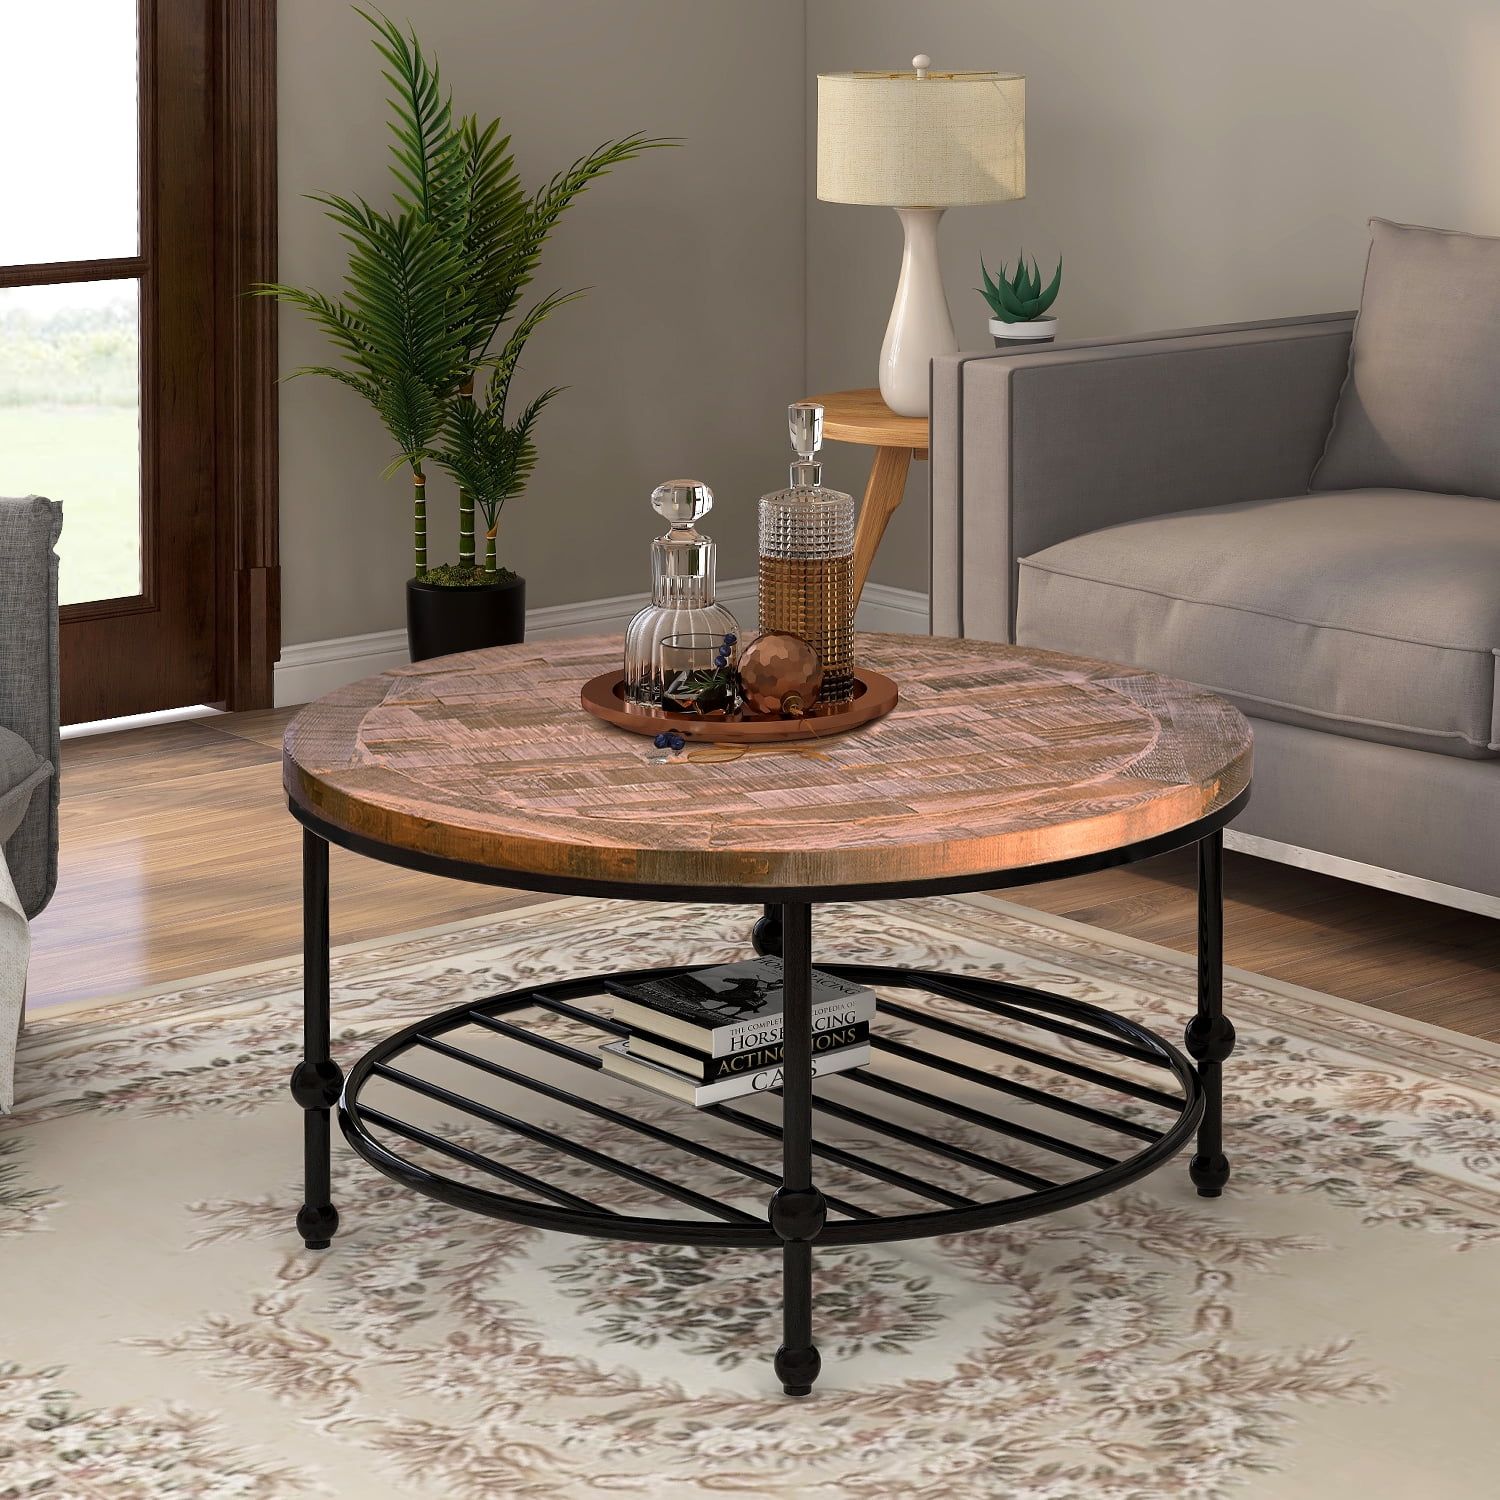 Rustic Natural Round Coffee Table With Storage Shelf For Living Room With Coffee Tables With Round Wooden Tops (View 7 of 20)